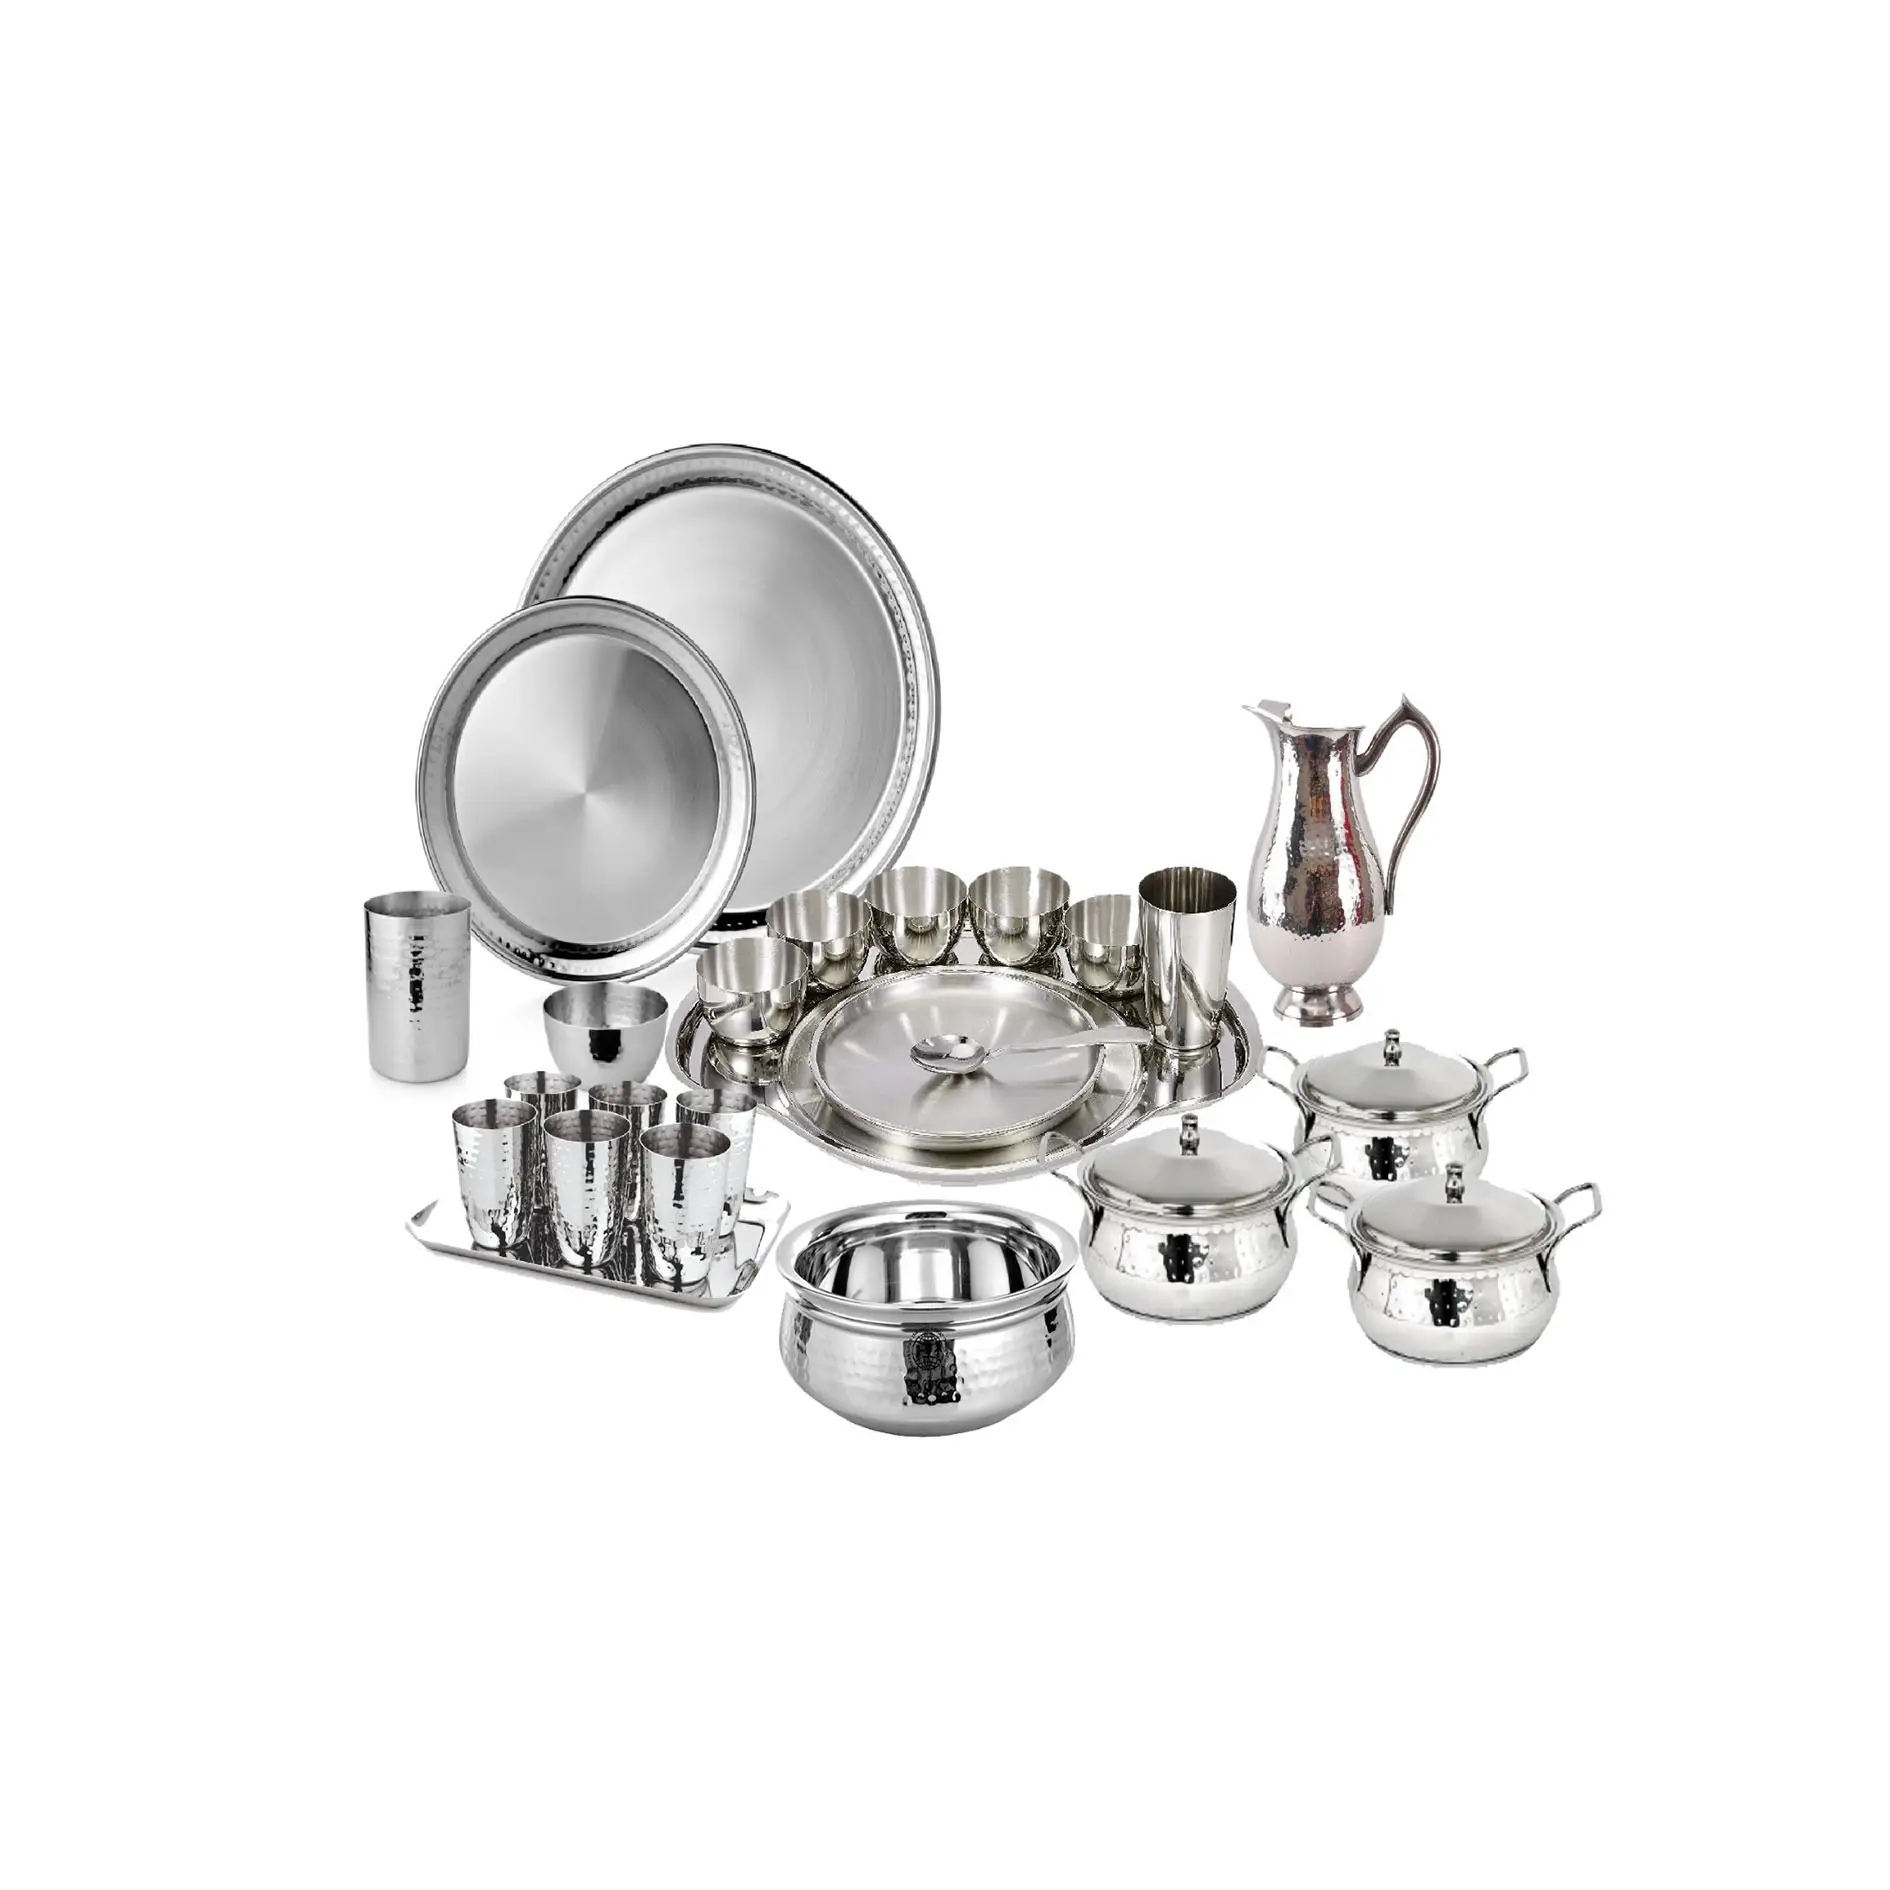 STAINLESS STEEL HANDI SET SERVING DiSH SET FOR SERVING FOOD PARTY WEDDING FUNCTION